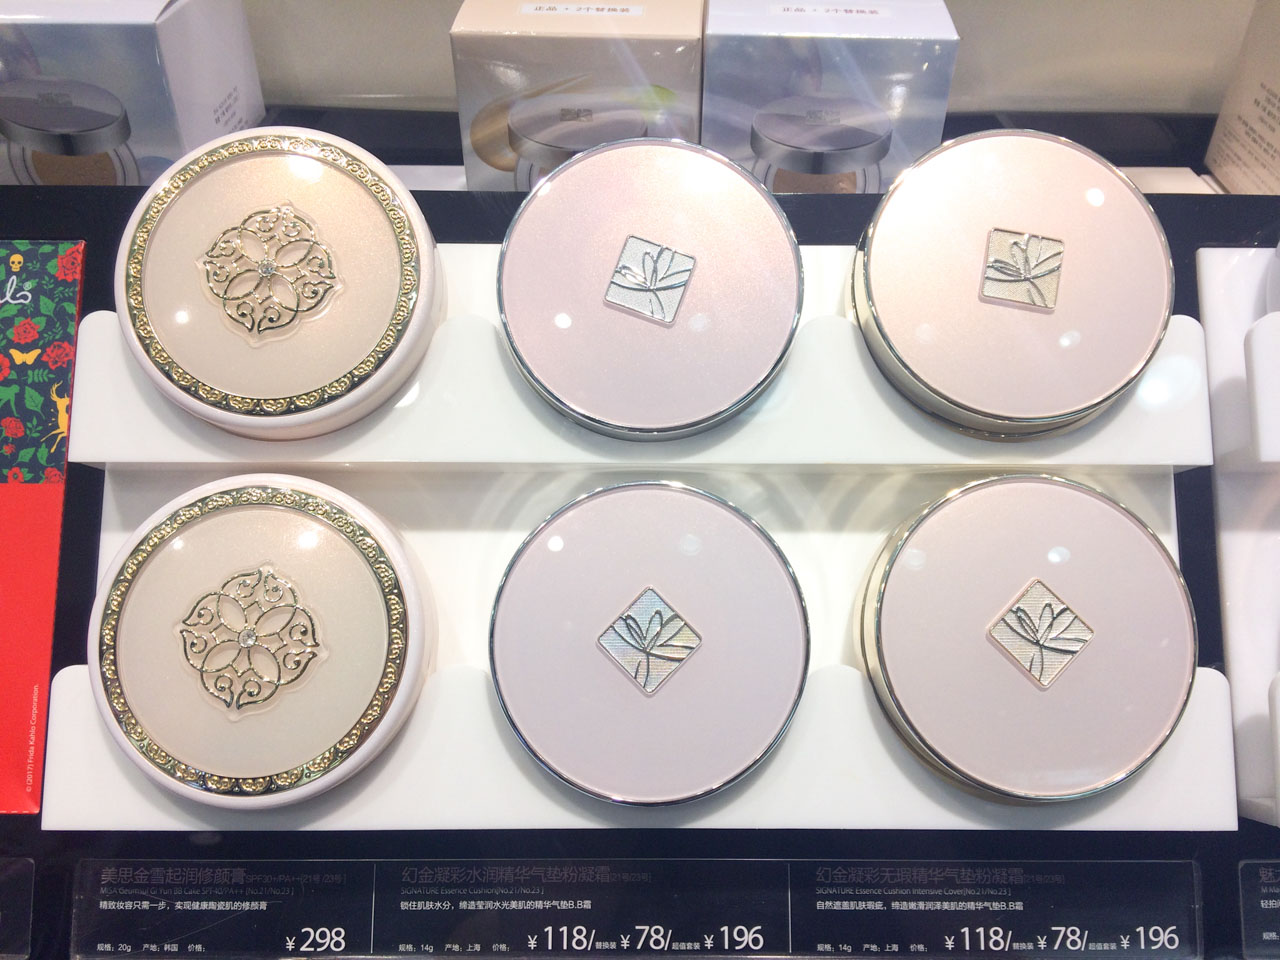 Decorative compact powder cases on display at a Missha shop in Beijing, China